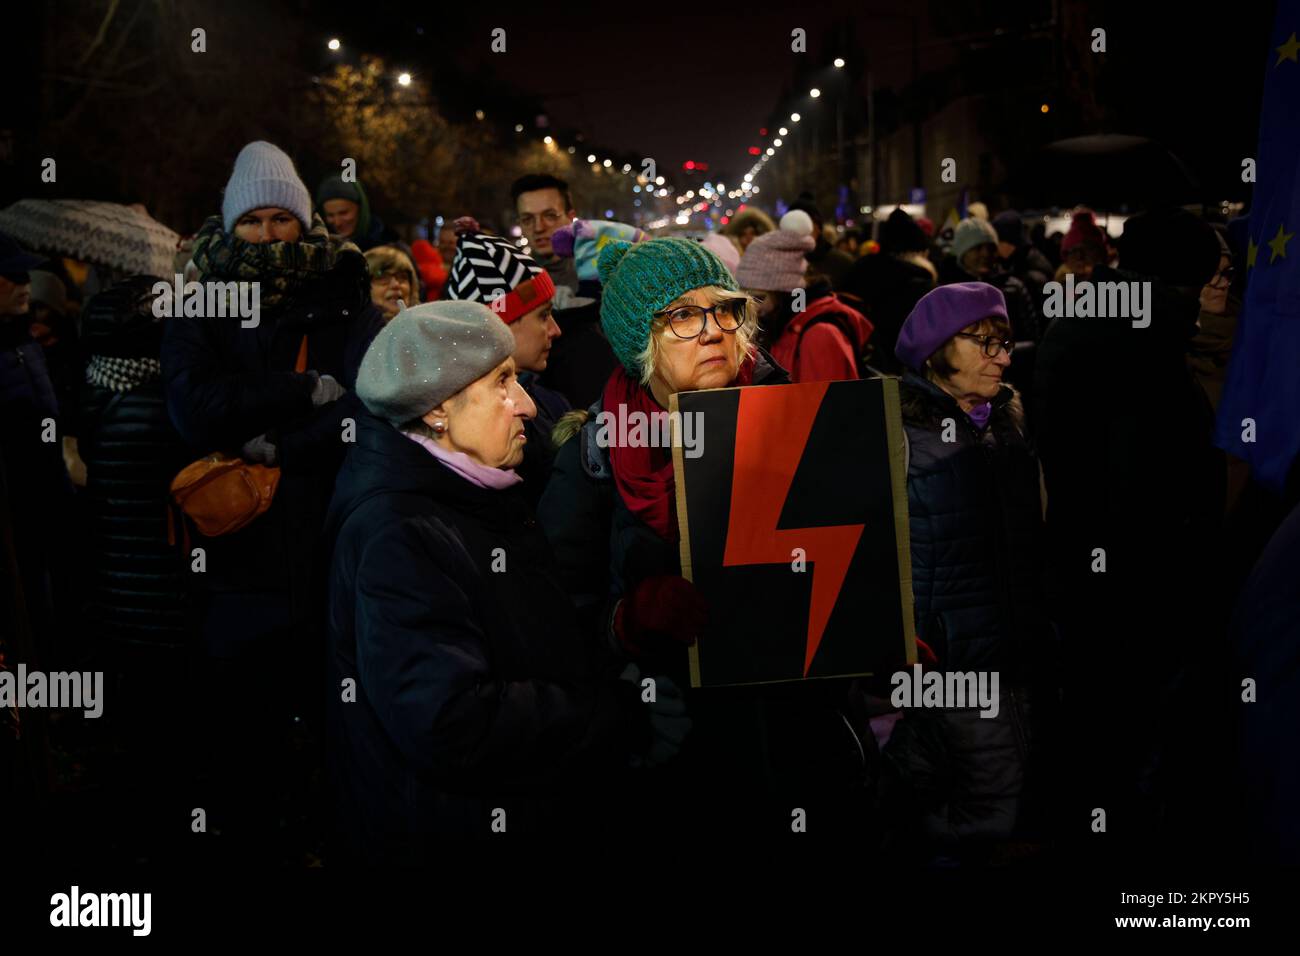 A woman holds a sign with a lightning strike symbol, the symbold of the women's rights movement during a rally in Warsaw, Poland on 28 November, 2022. Several hundred peopple took part in a rally in front of the country's de facto leader Jaroslaw Kaczynski's home. Previously Kaczynski, whose ruling Law and Justice Party (PiS) has close ties to the Catholic church, publicly made a statement that the declining birth rate is caused by women drinking like men. Poland has some of the world's strictest abortion laws and the EU's worst access to contraception. (Photo by Jaap Arriens/Sipa USA) Stock Photo